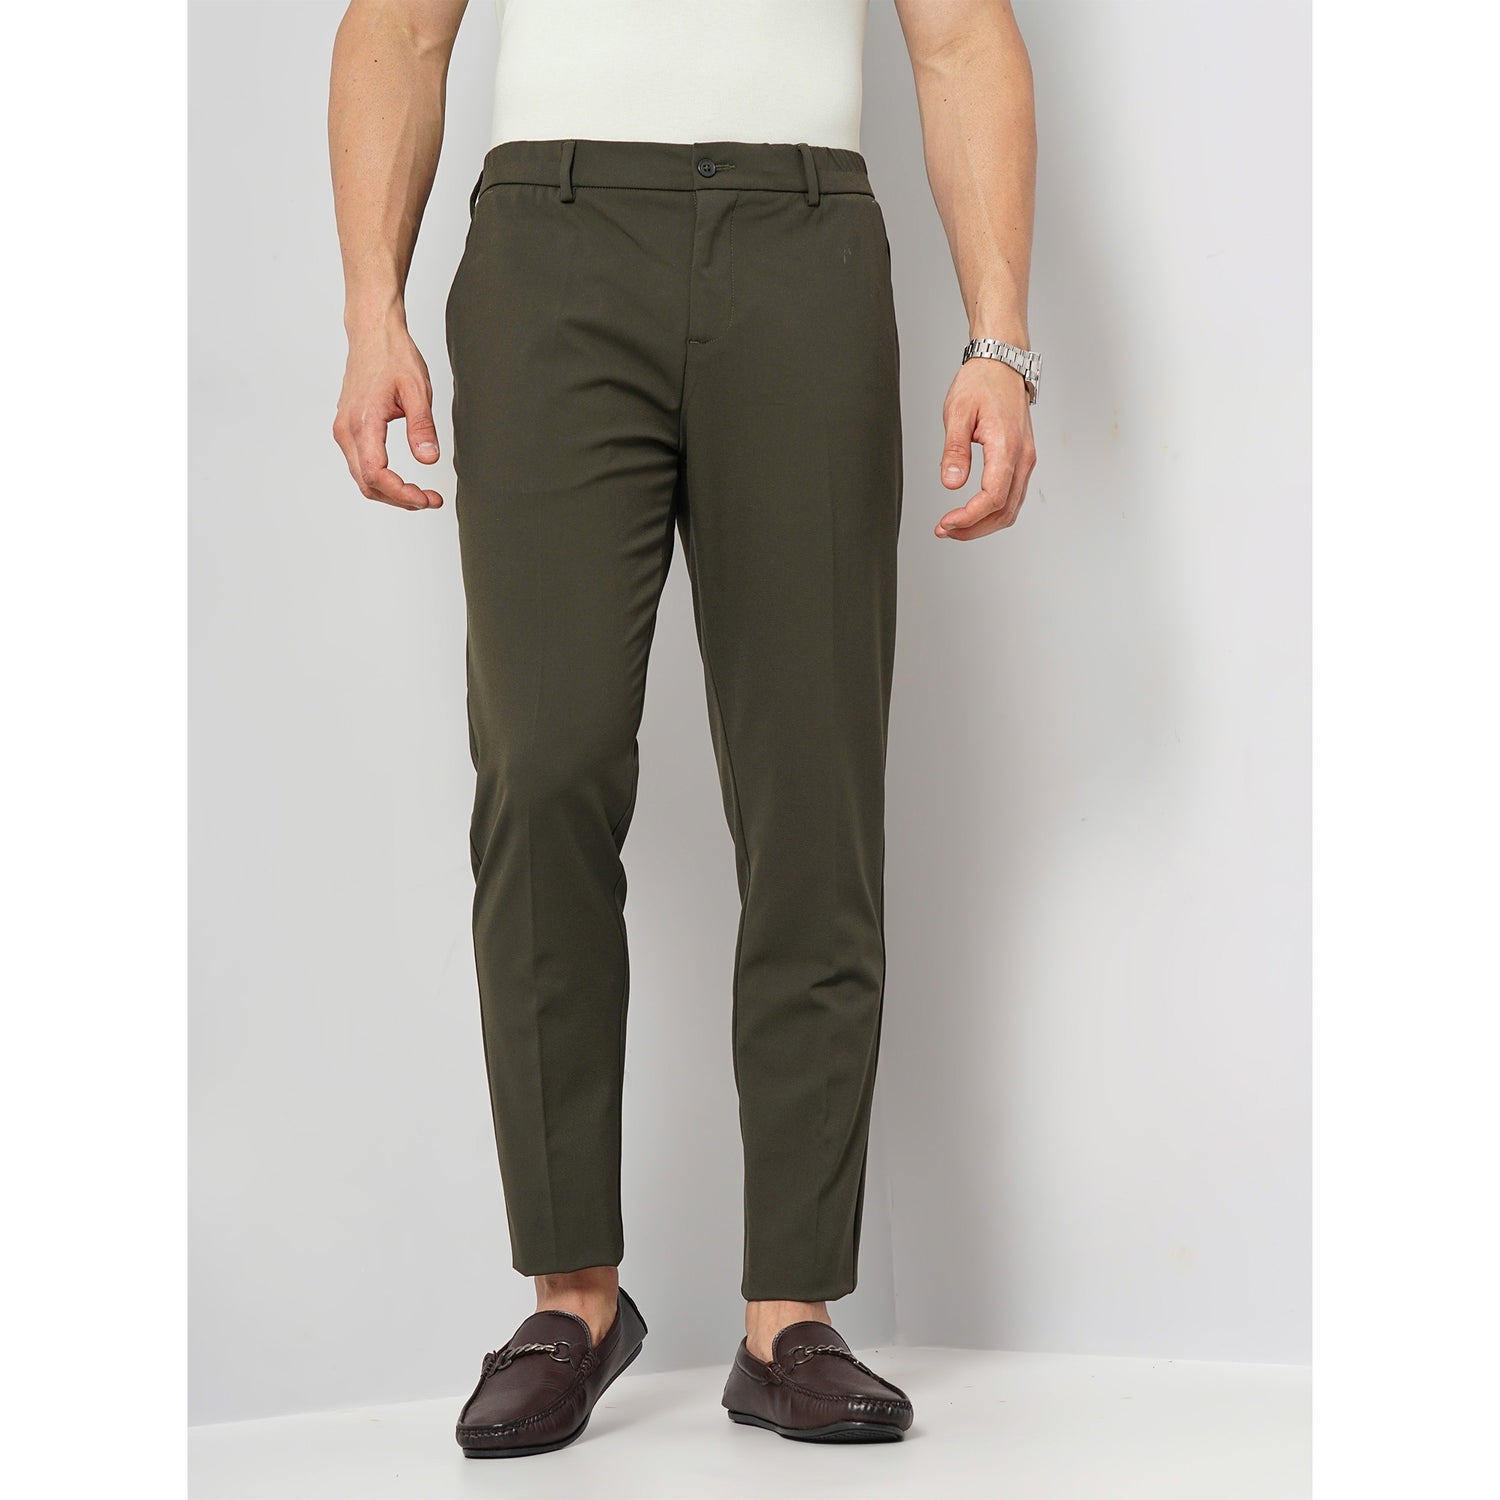 Solid Olive Poly-Blend Trousers (FOTRAVEL)